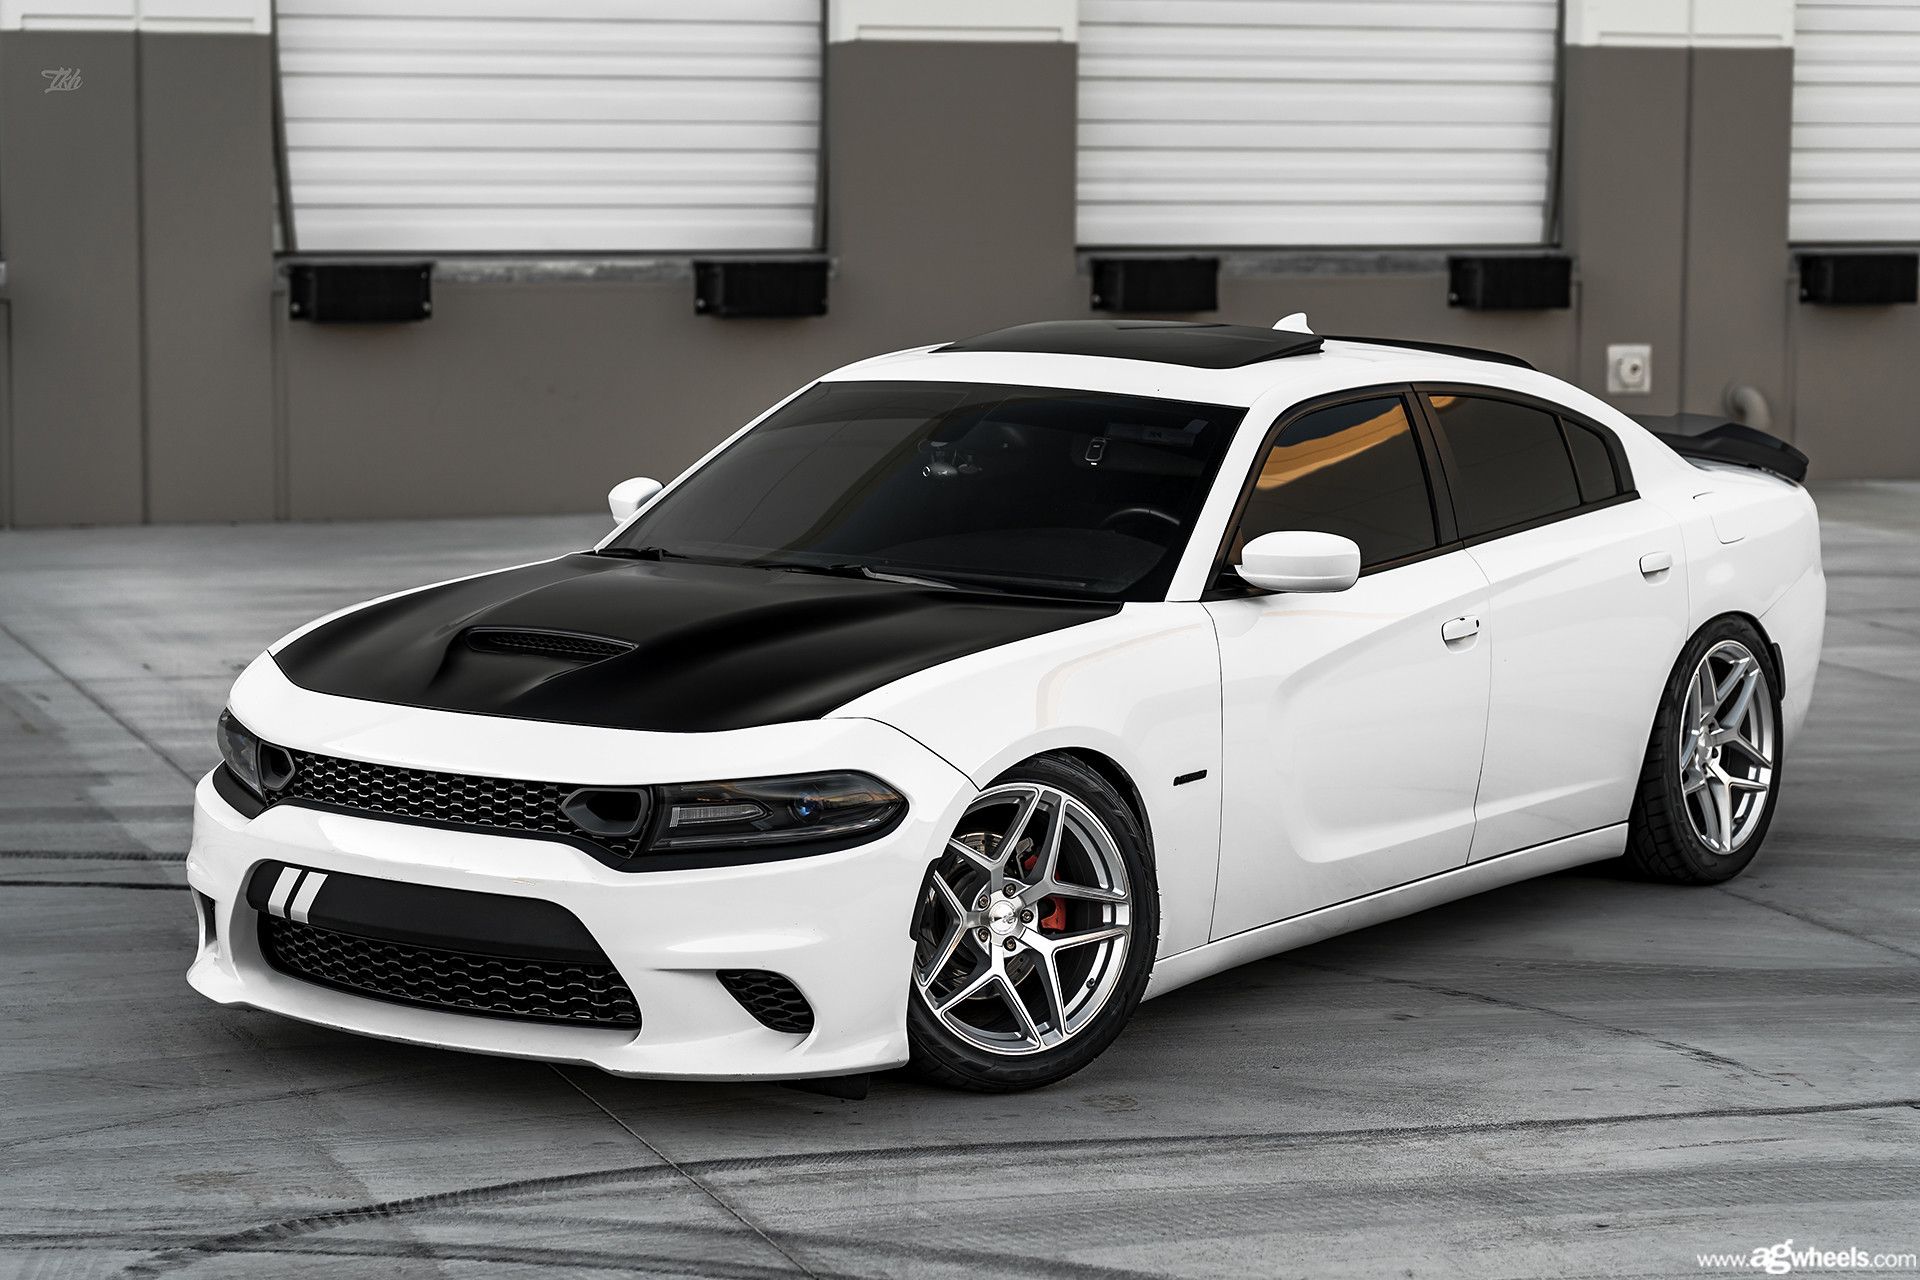 white rt charger